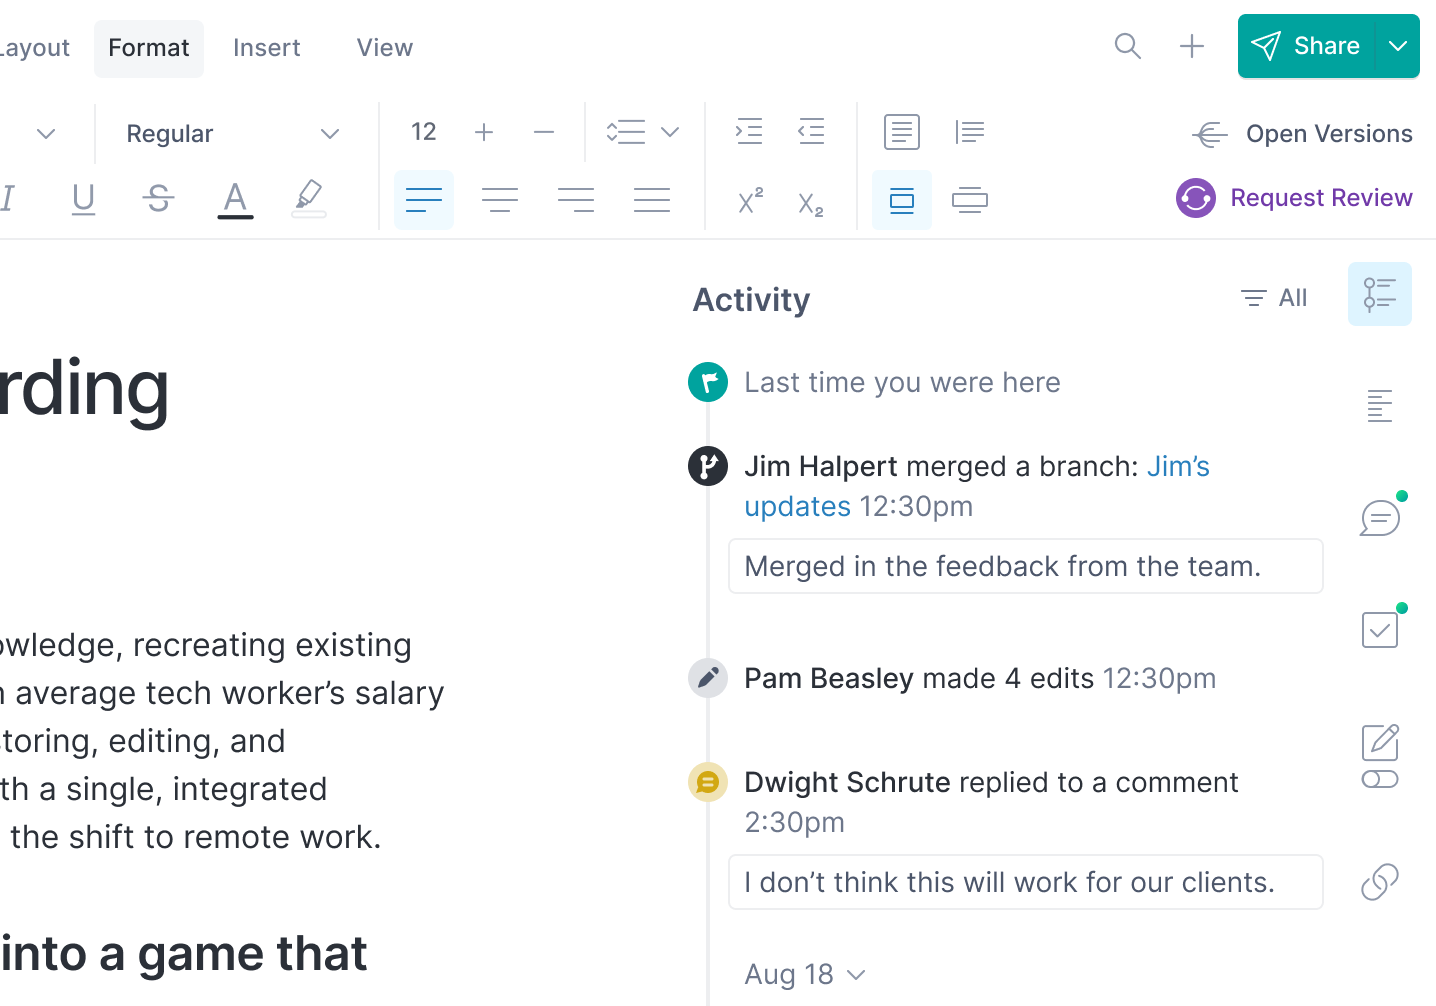 See an Activity Feed of every edit, comment, branch, share, and more.